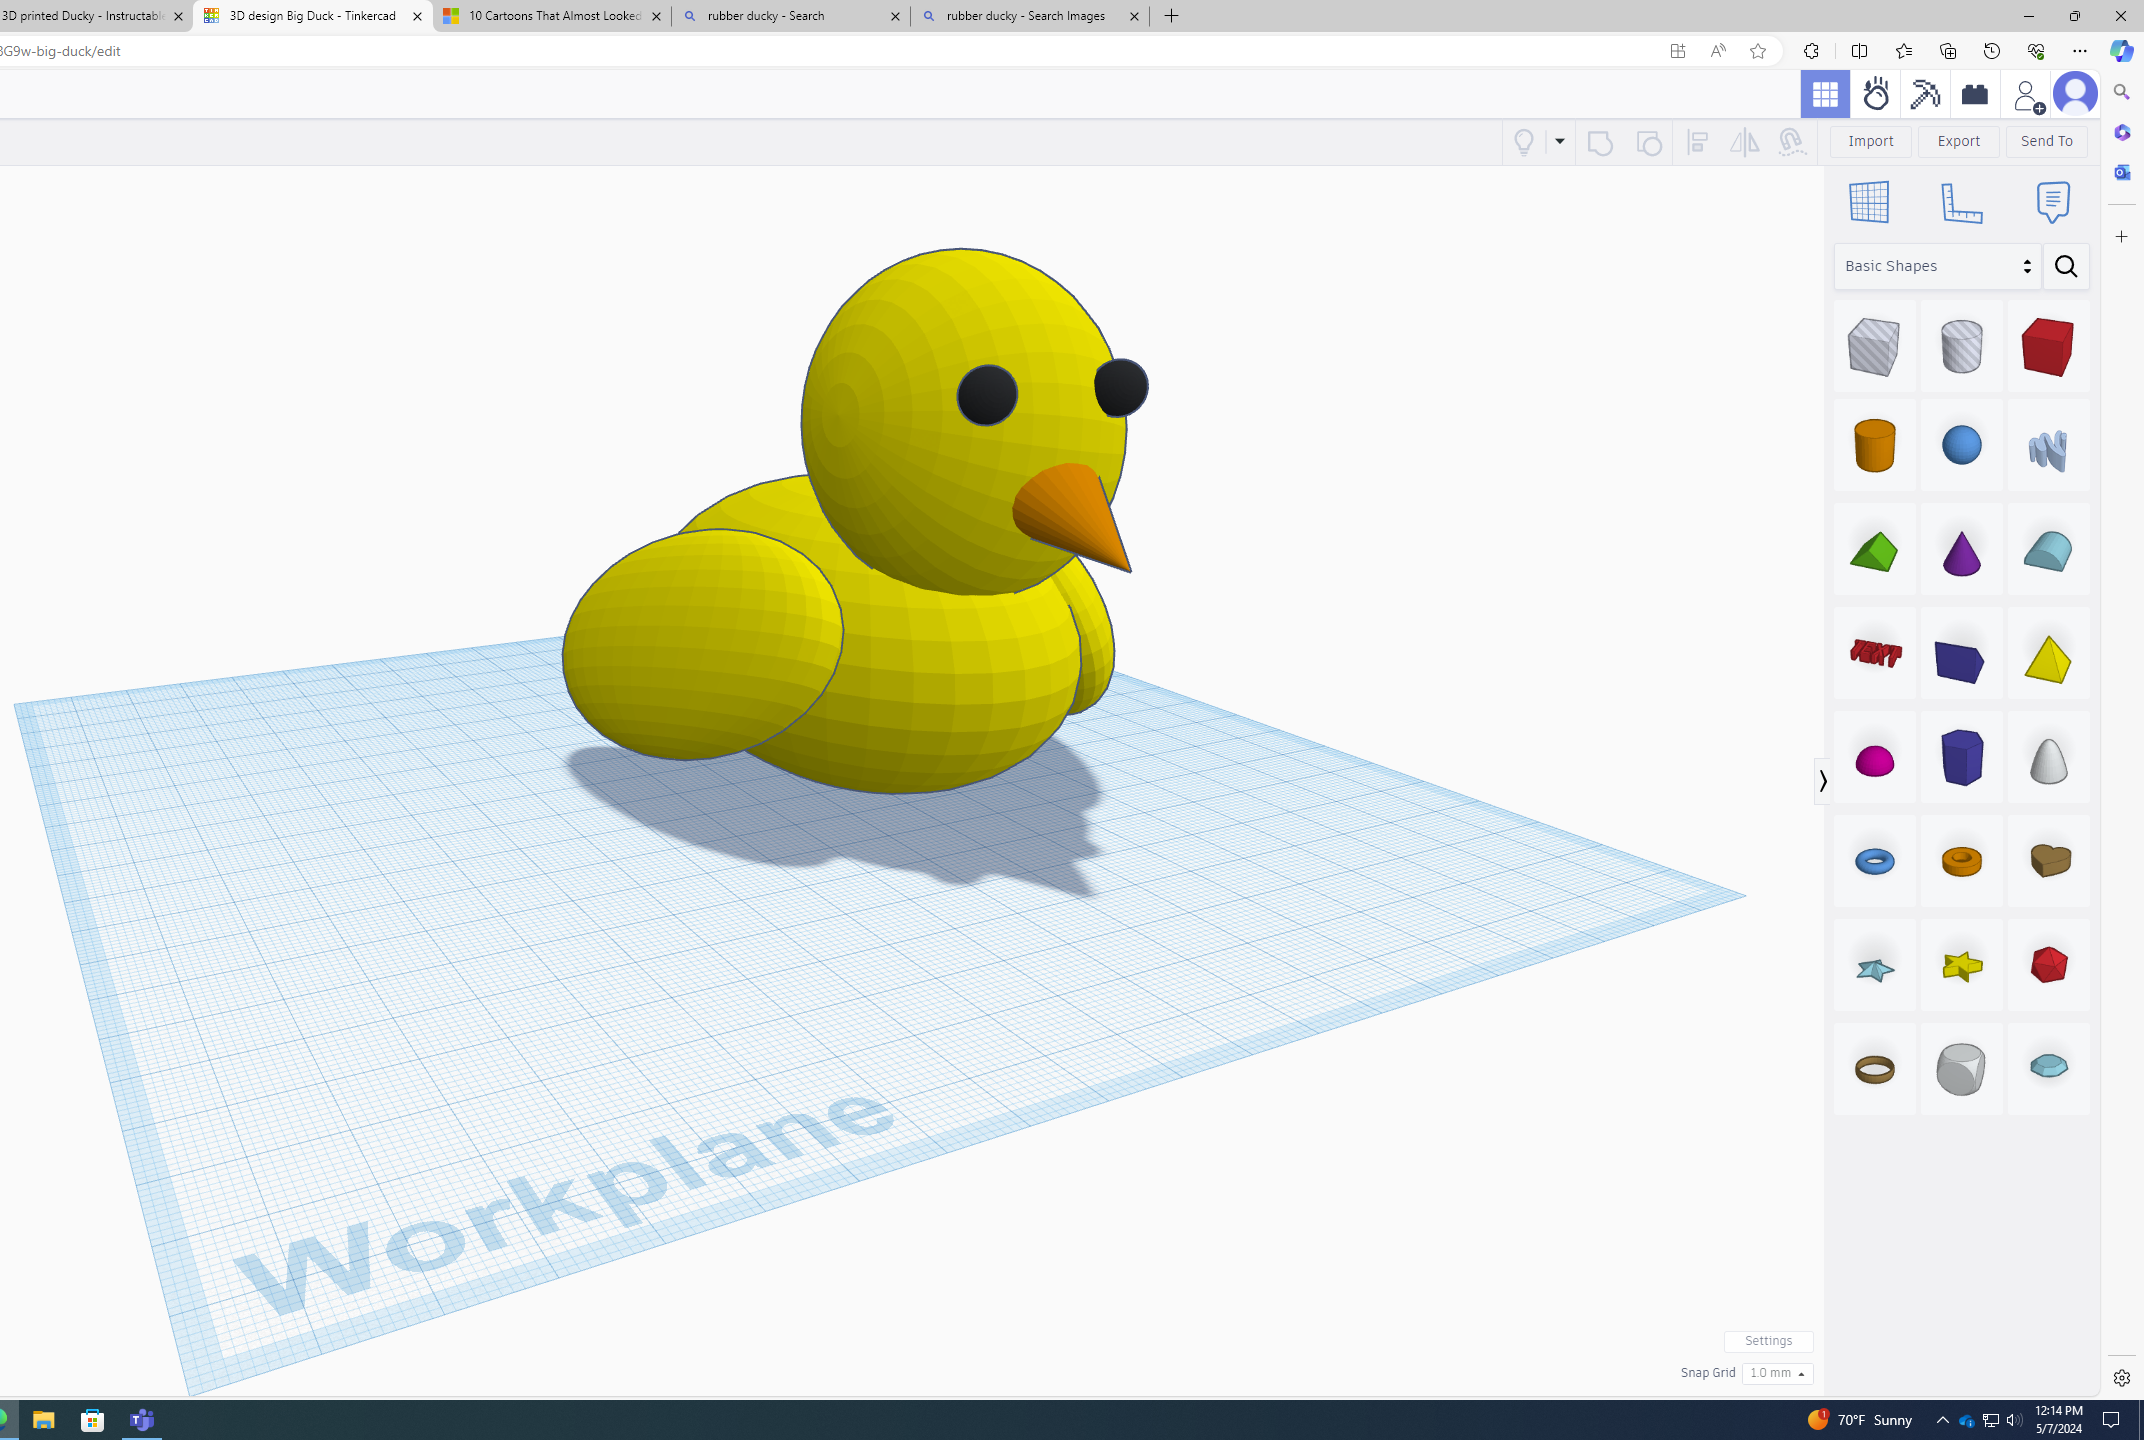 A 3D Printed Ducky Decoration